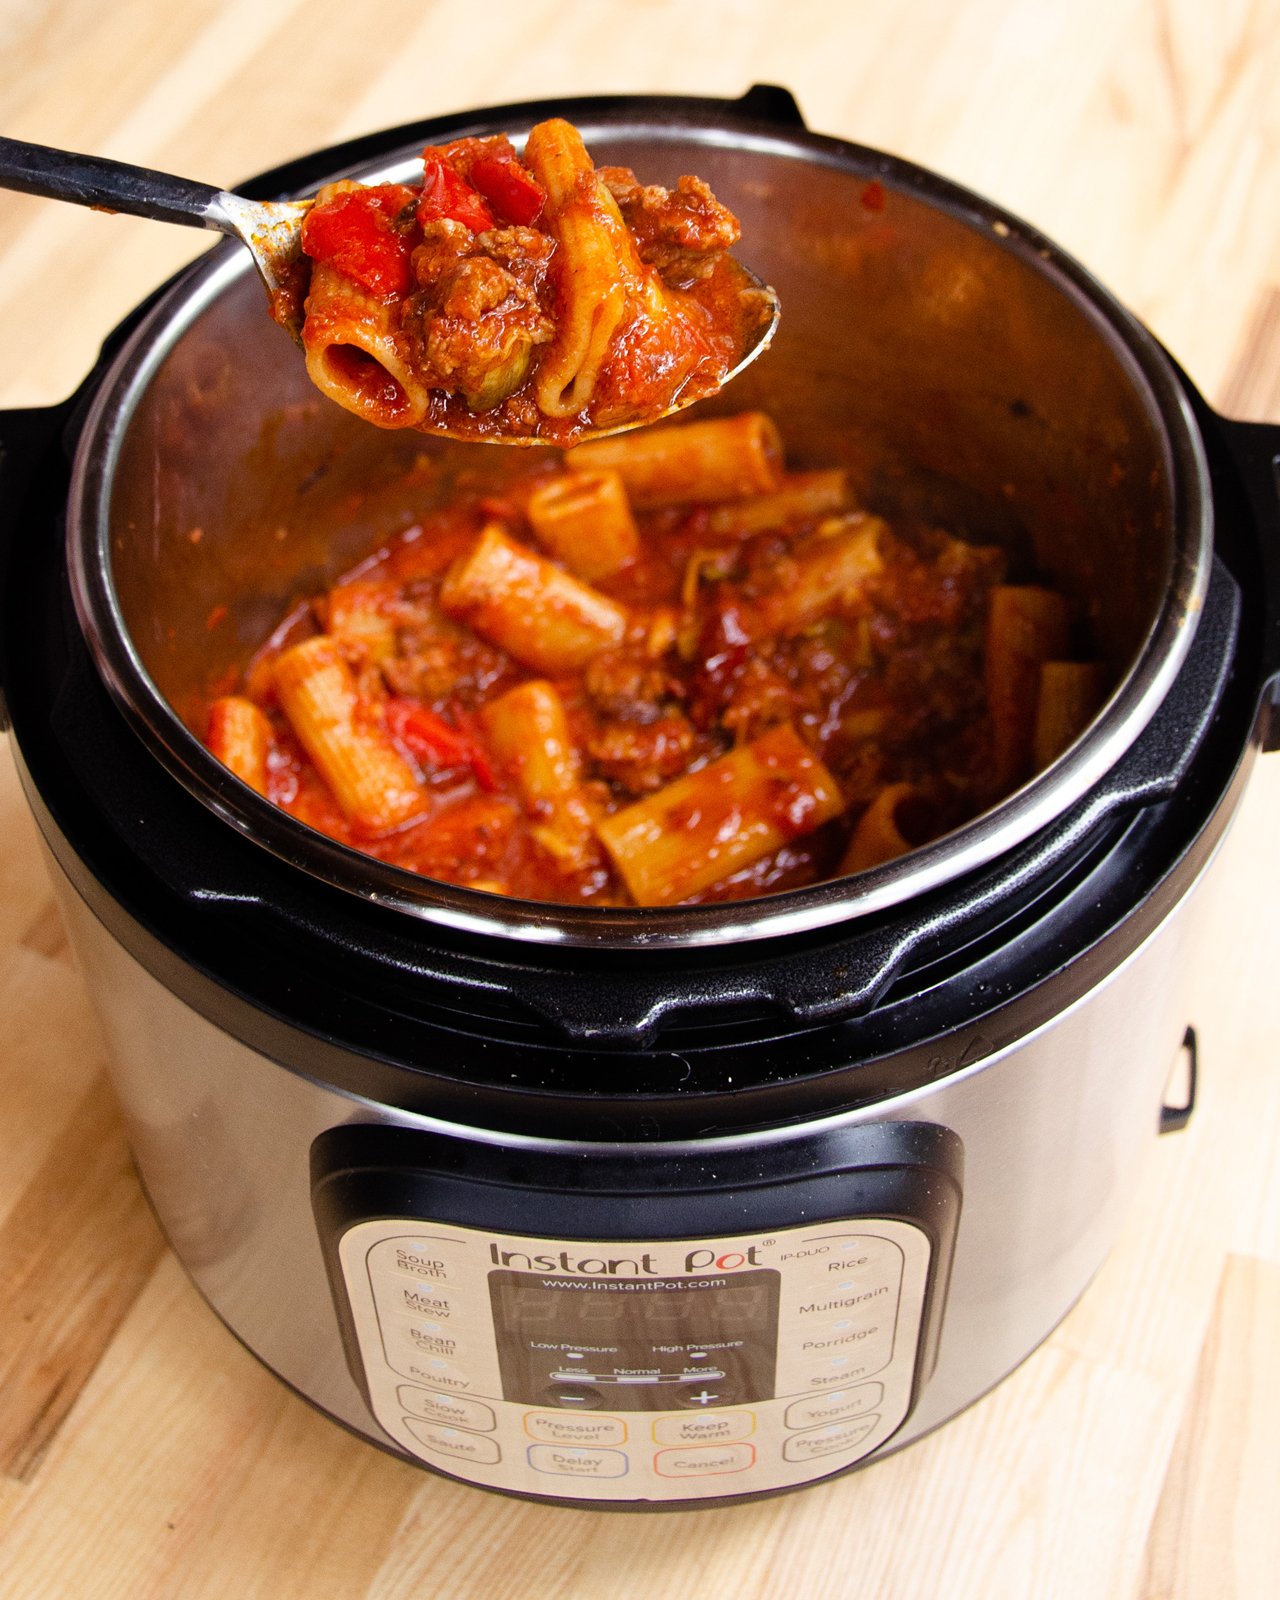 How to Use an Instant Pot! Time to Pull It Out! Instant Pot 101 